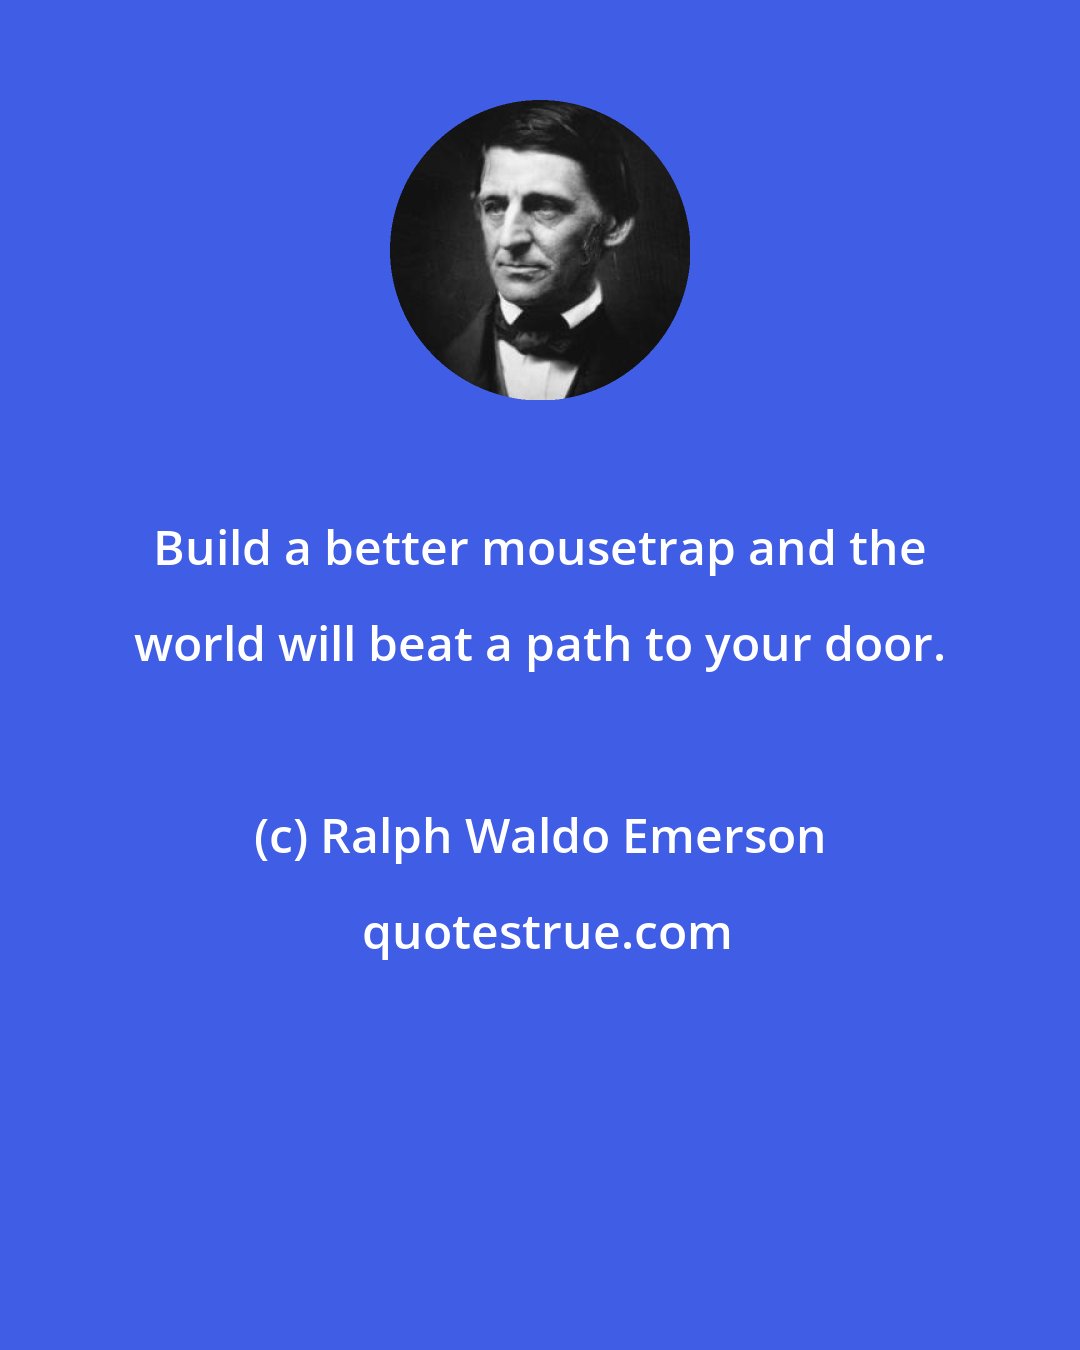 Ralph Waldo Emerson: Build a better mousetrap and the world will beat a path to your door.